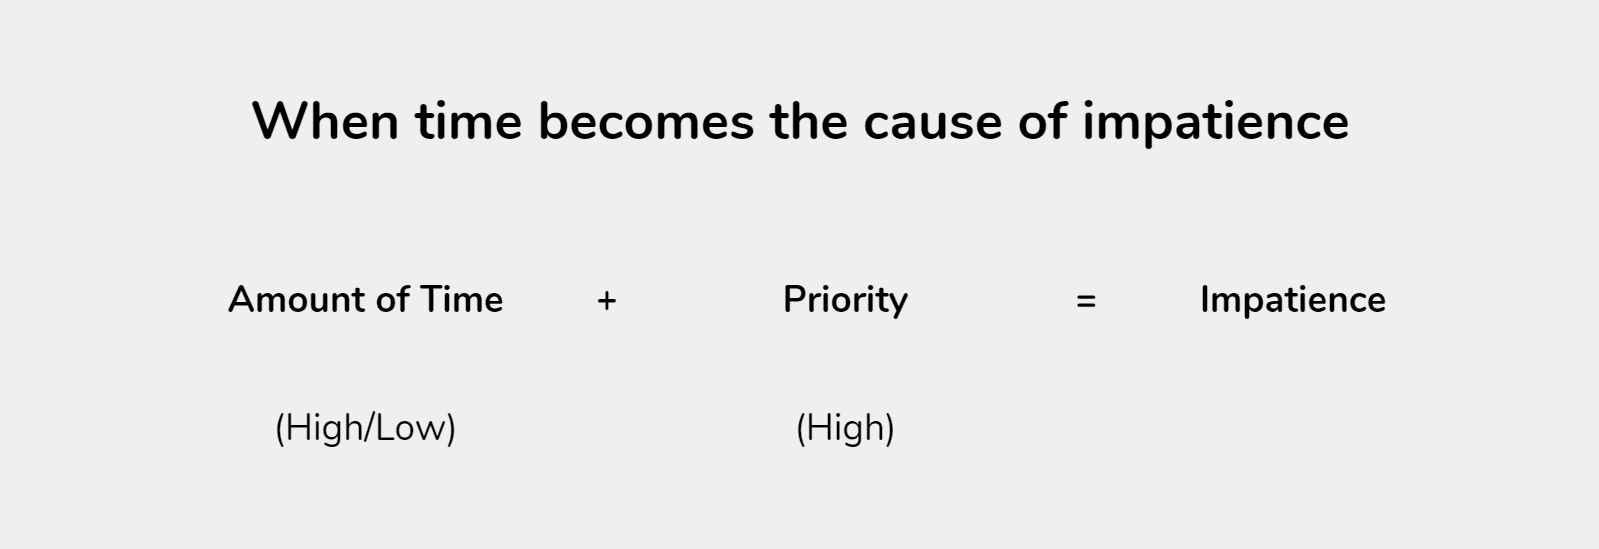 Role of time and task priority to cause impatience